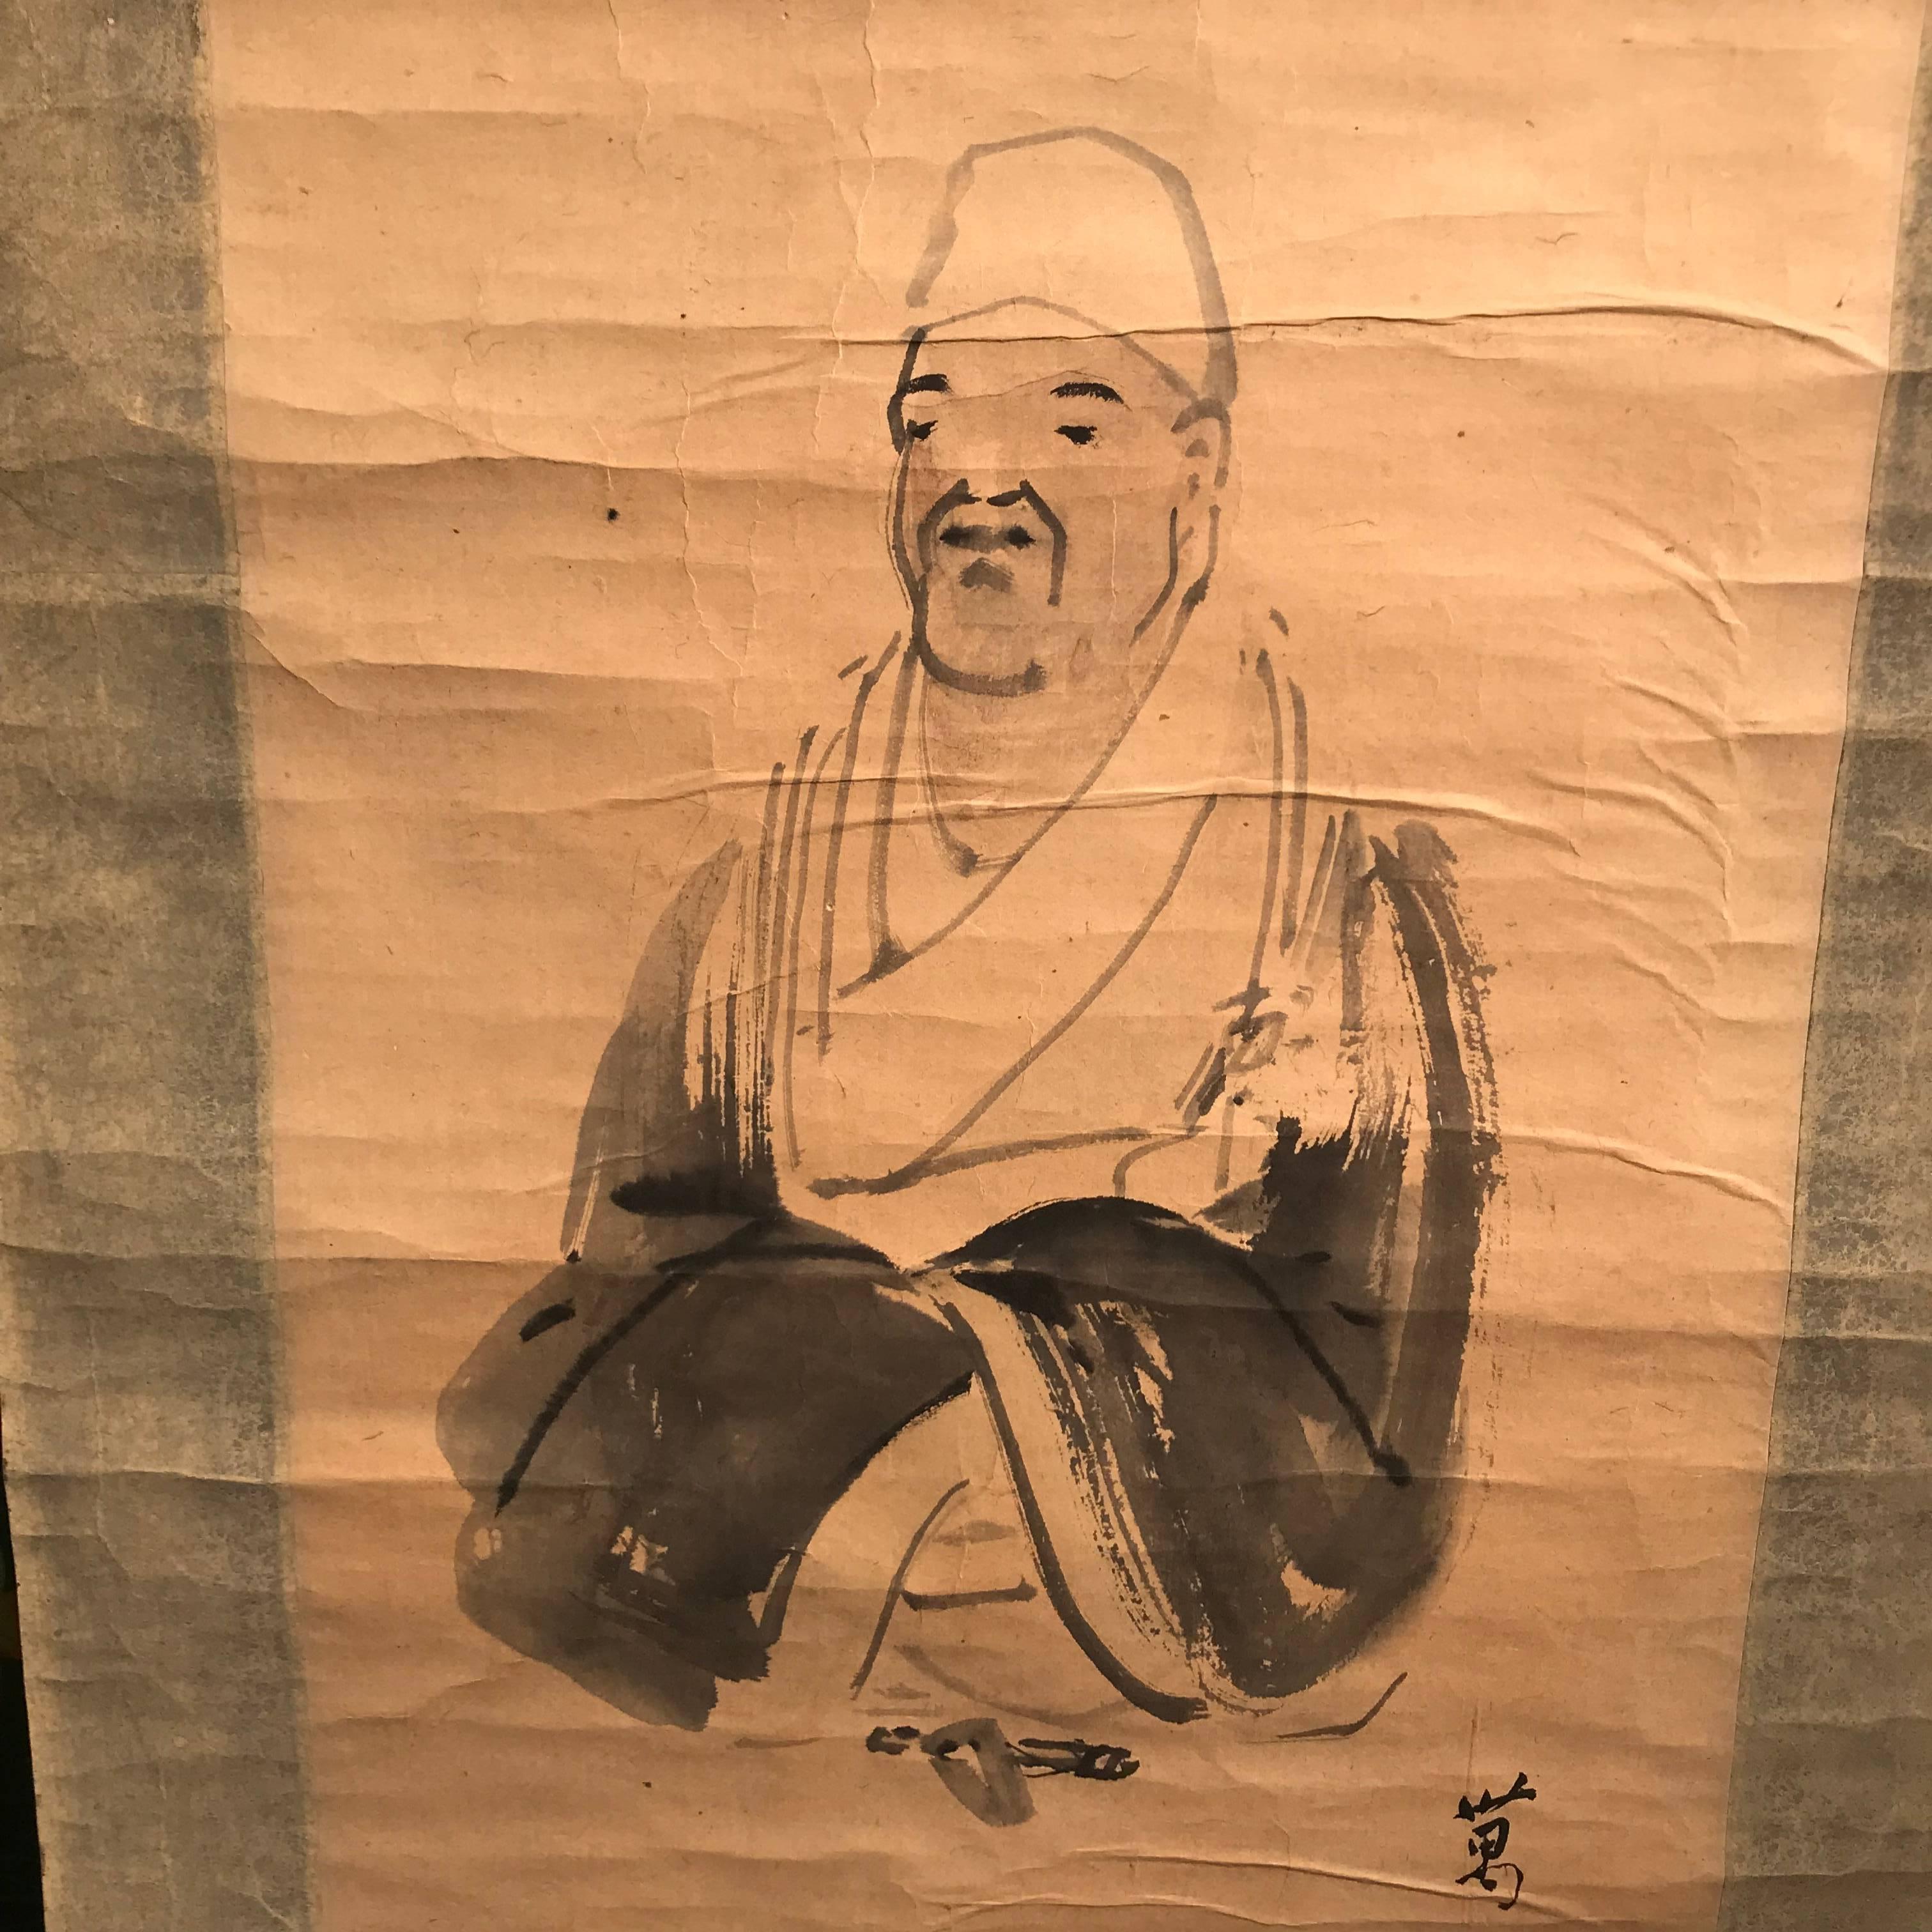 A simple zen style Japanese antique paper scroll of Matsuo Basho - Japan's most famous poet and master of the Haiku, Meiji period, 19th century. The master seated in simple pose.

Artists stamp and seal lower right. 

Dimensions: 18.5 inches wide